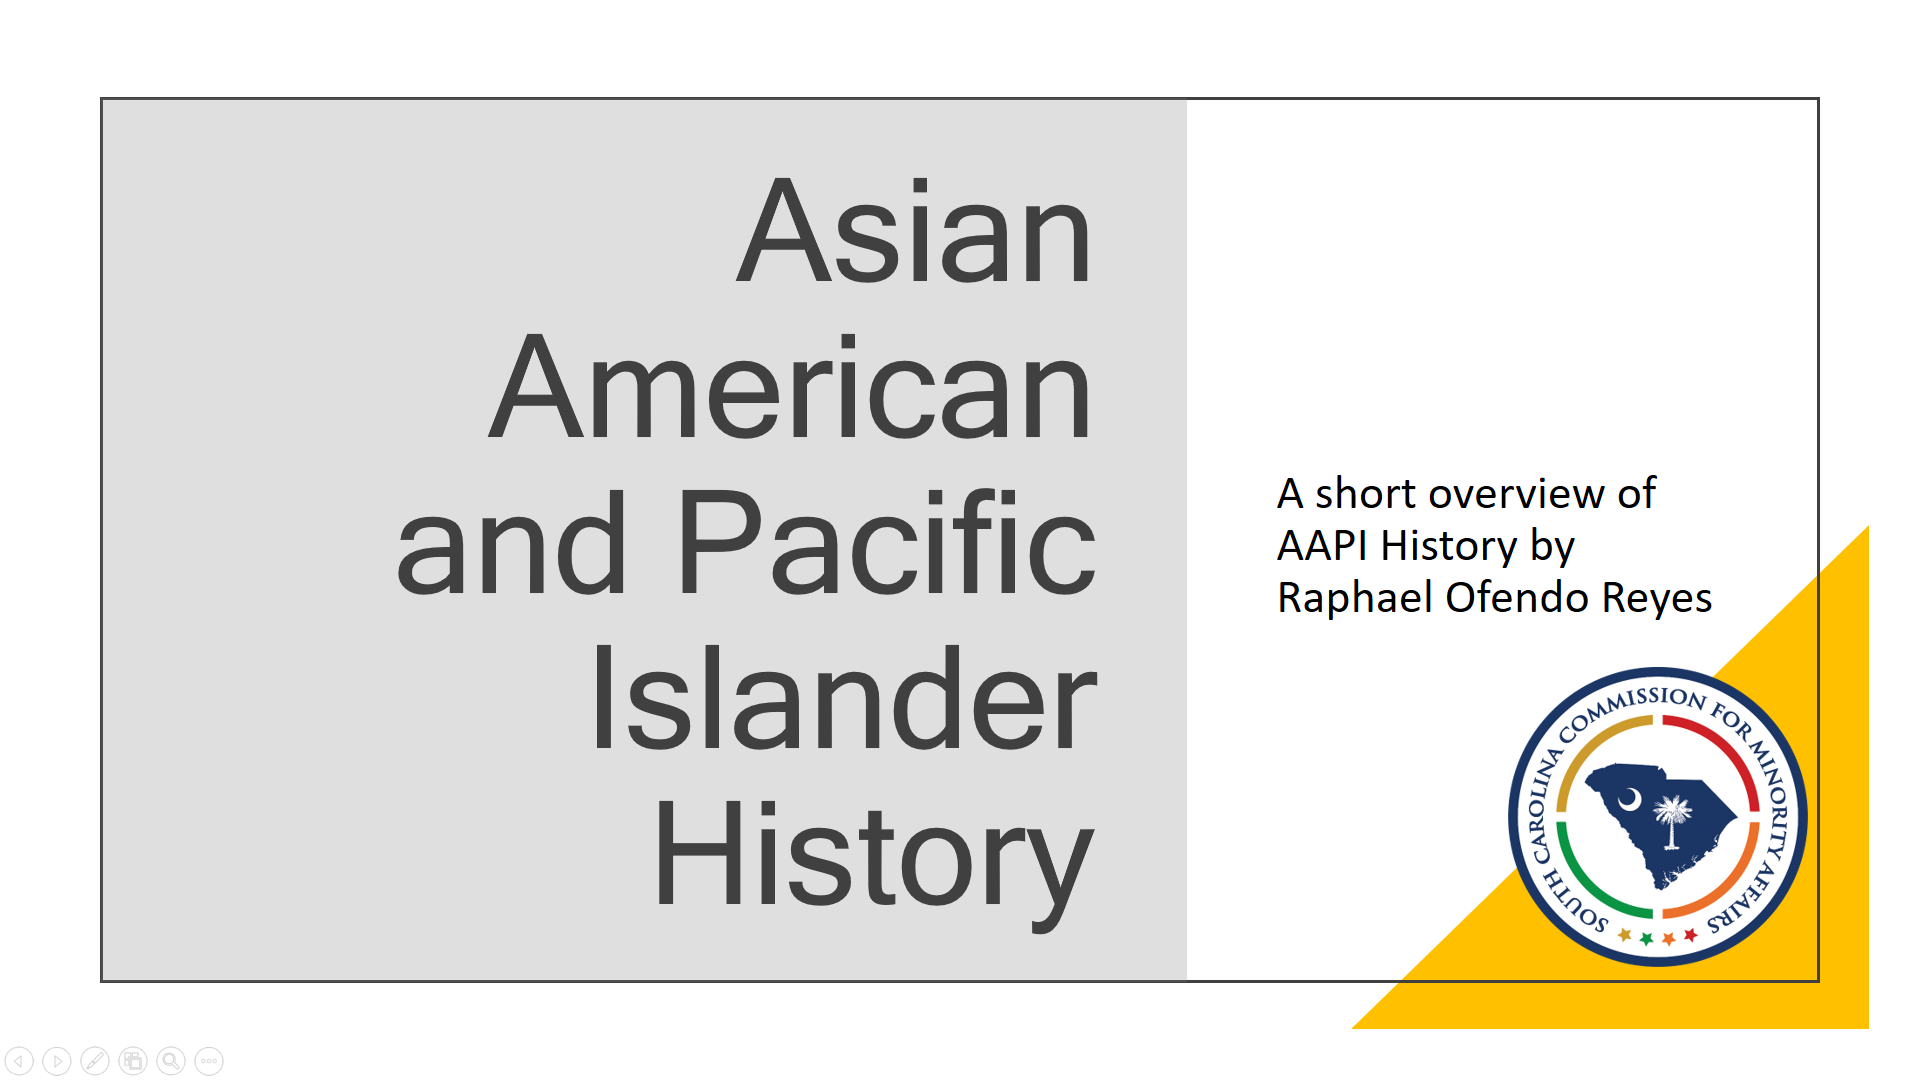 Title slide of the Asian American and Pacific islander History Powerpoint presentation